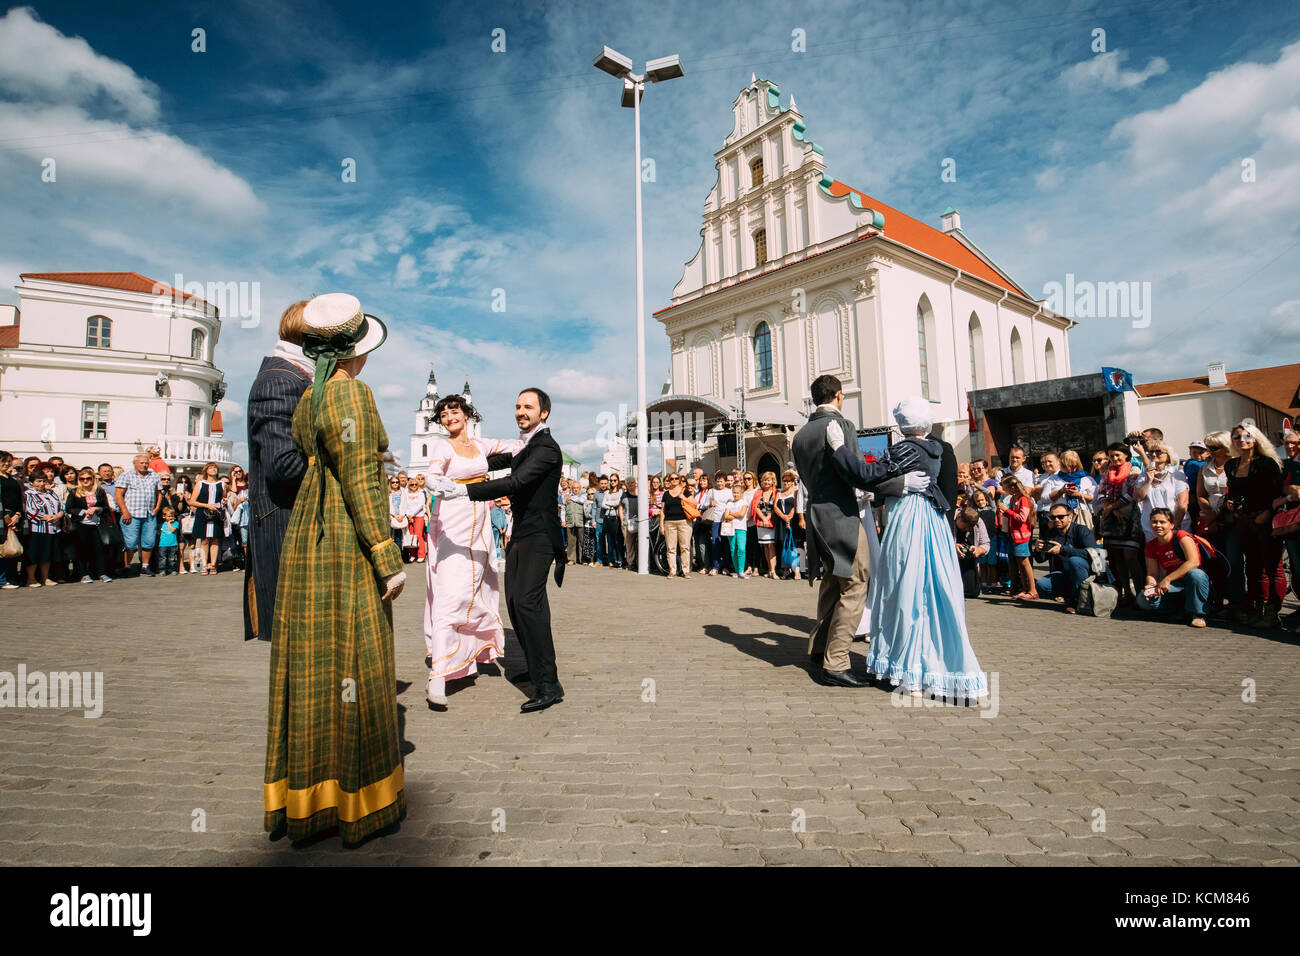 Minsk, Belarus - September 3, 2016: Couple of young people dressed in clothes of the 19th century dancing Polonaise at the celebration of the Day of M Stock Photo